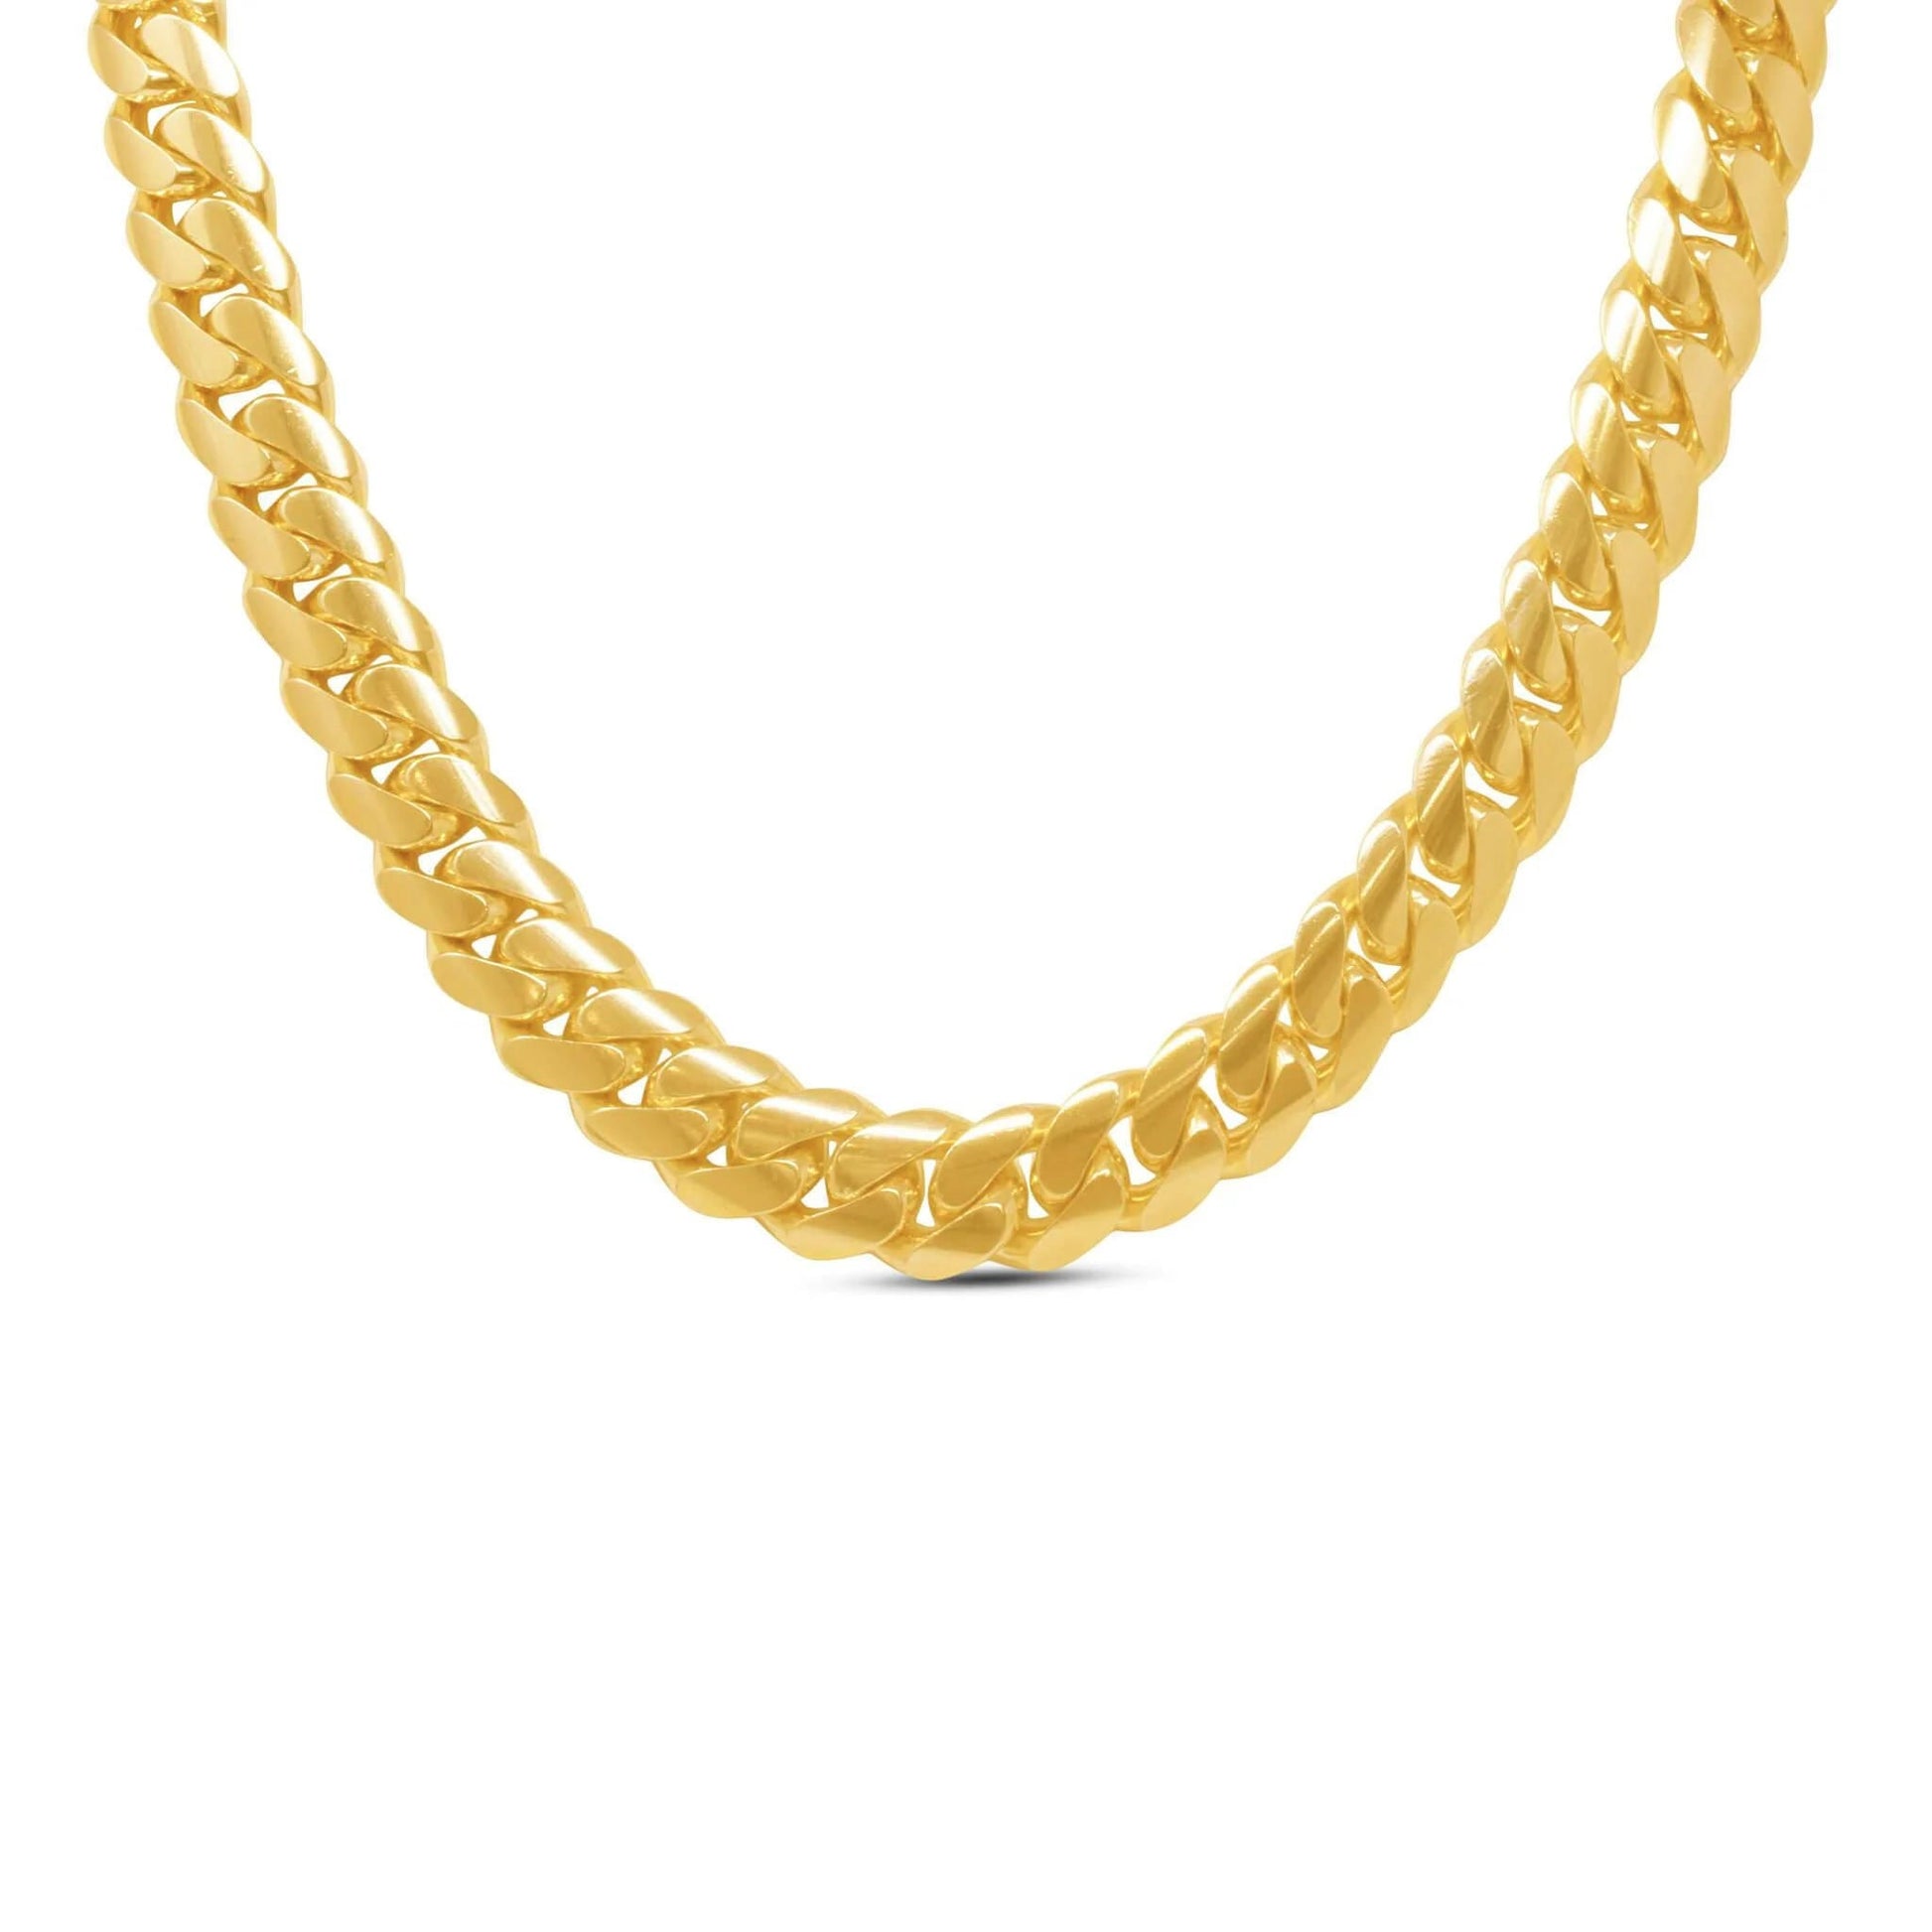 18mm Miami Cuban Link Bracelet in 10K Solid Yellow Gold - Vera Jewelry in Miami